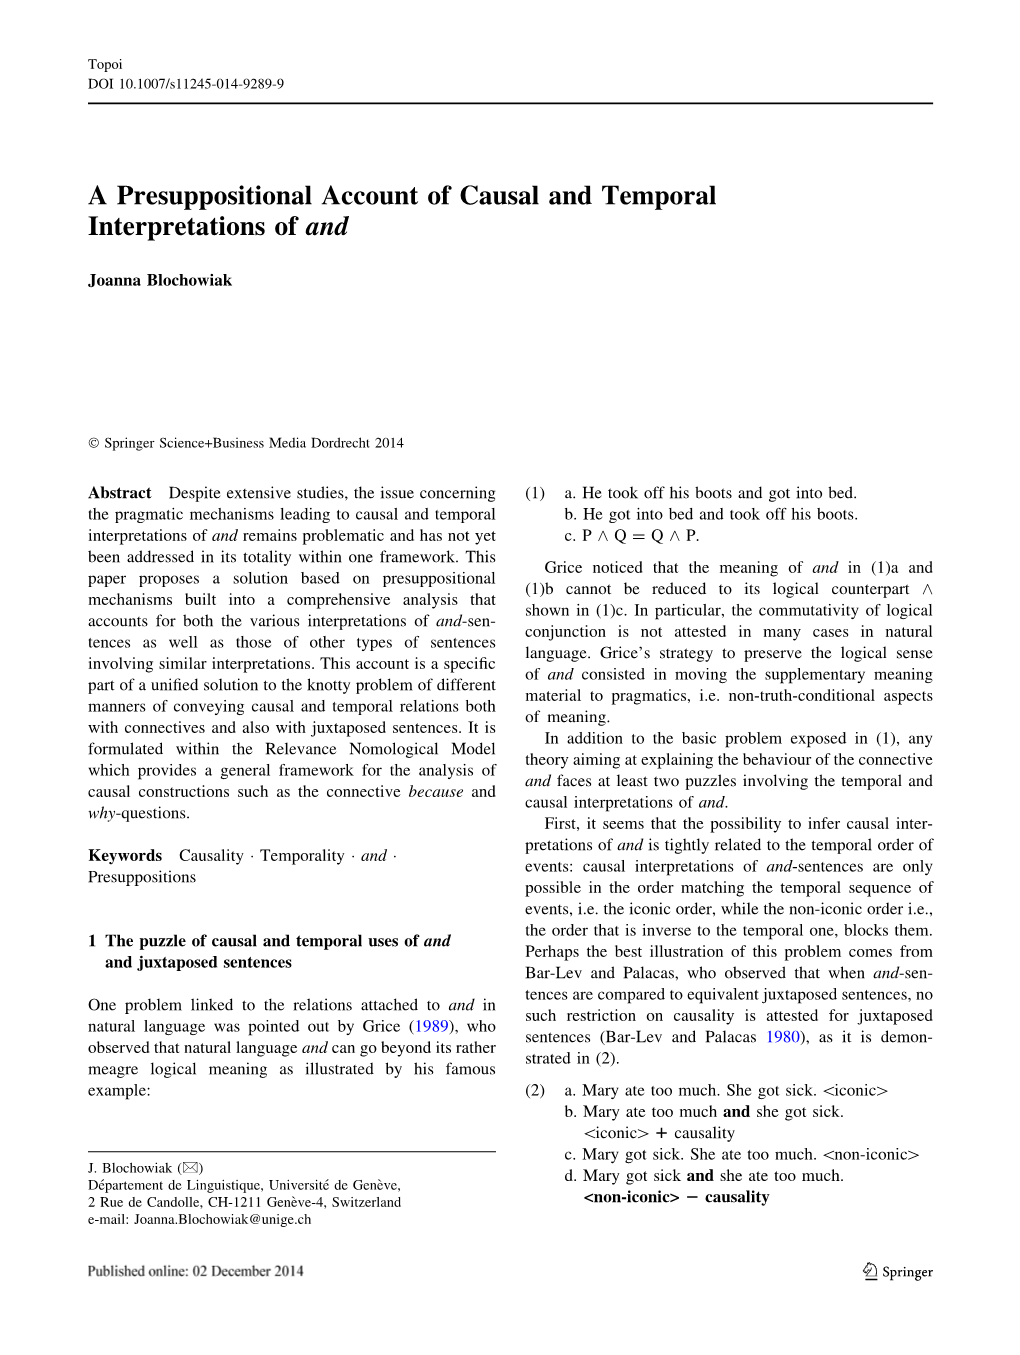 A Presuppositional Account of Causal and Temporal Interpretations of And